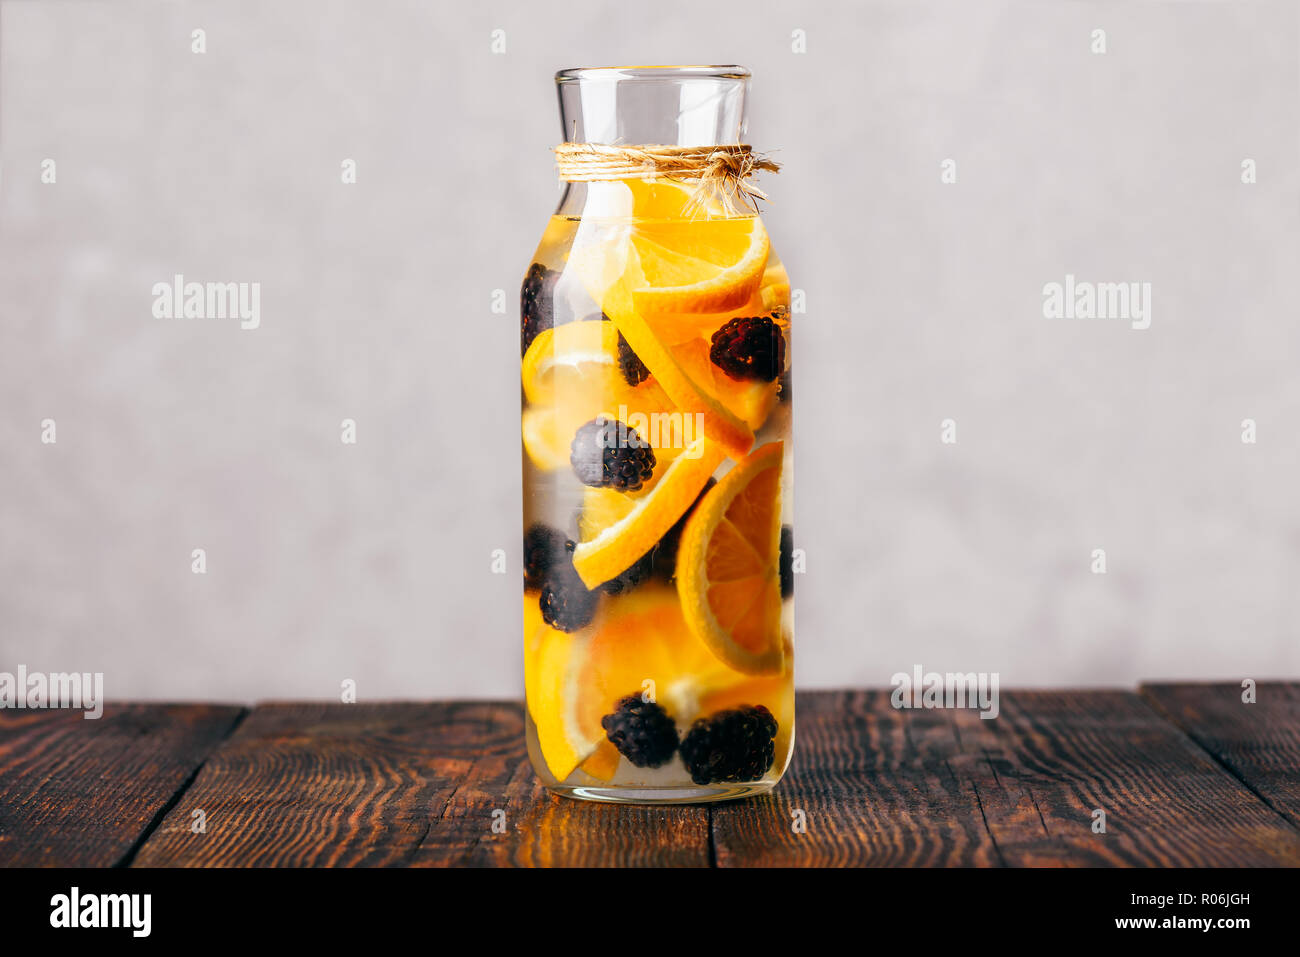 Bottle of Detox Water Infused with Sliced Raw Orange and Fresh Blackberry. Stock Photo